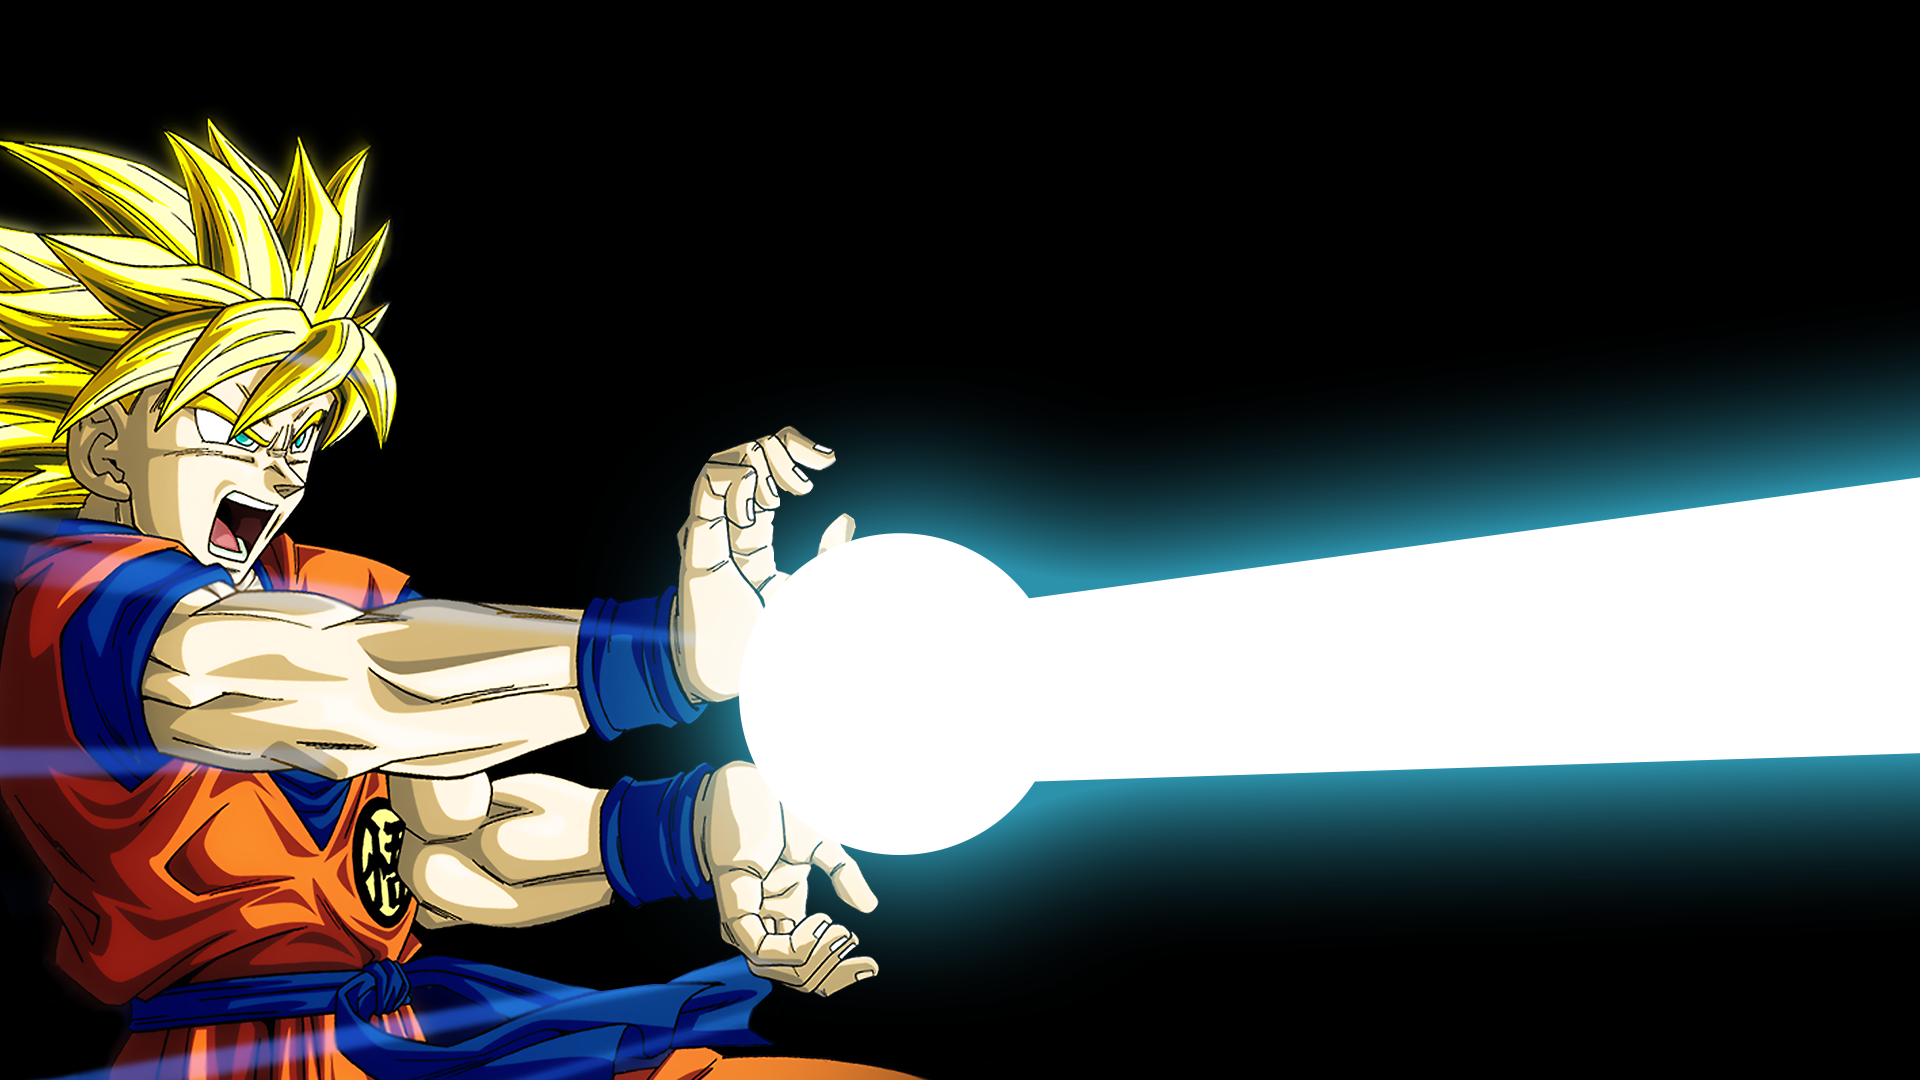 444 Dragon Ball Z HD Wallpapers Backgrounds - Wallpaper Abyss